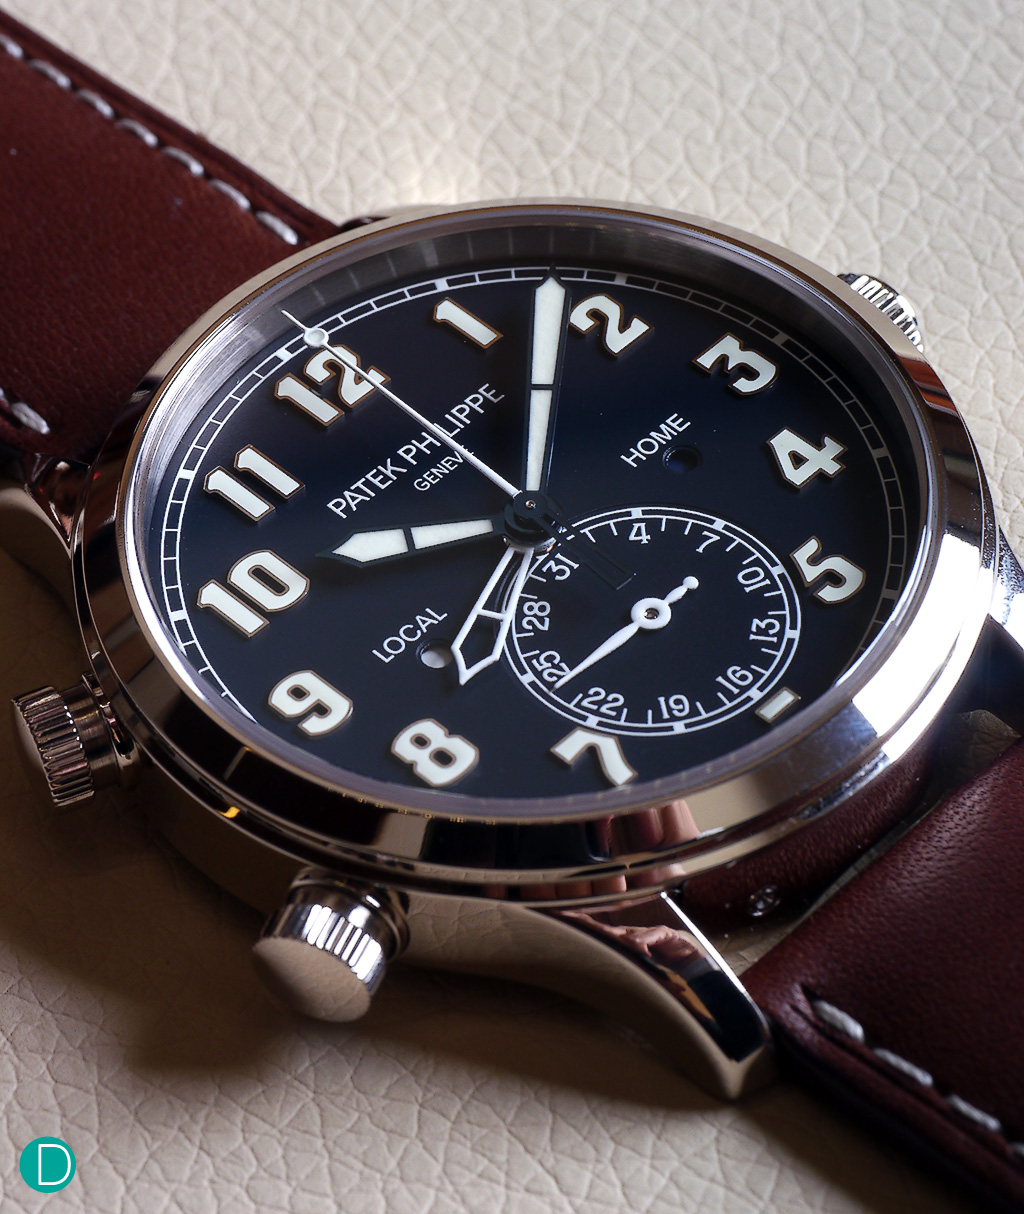 One of the most controversial watches from Patek Philippe: the Calatrava Pilot Travel Time.